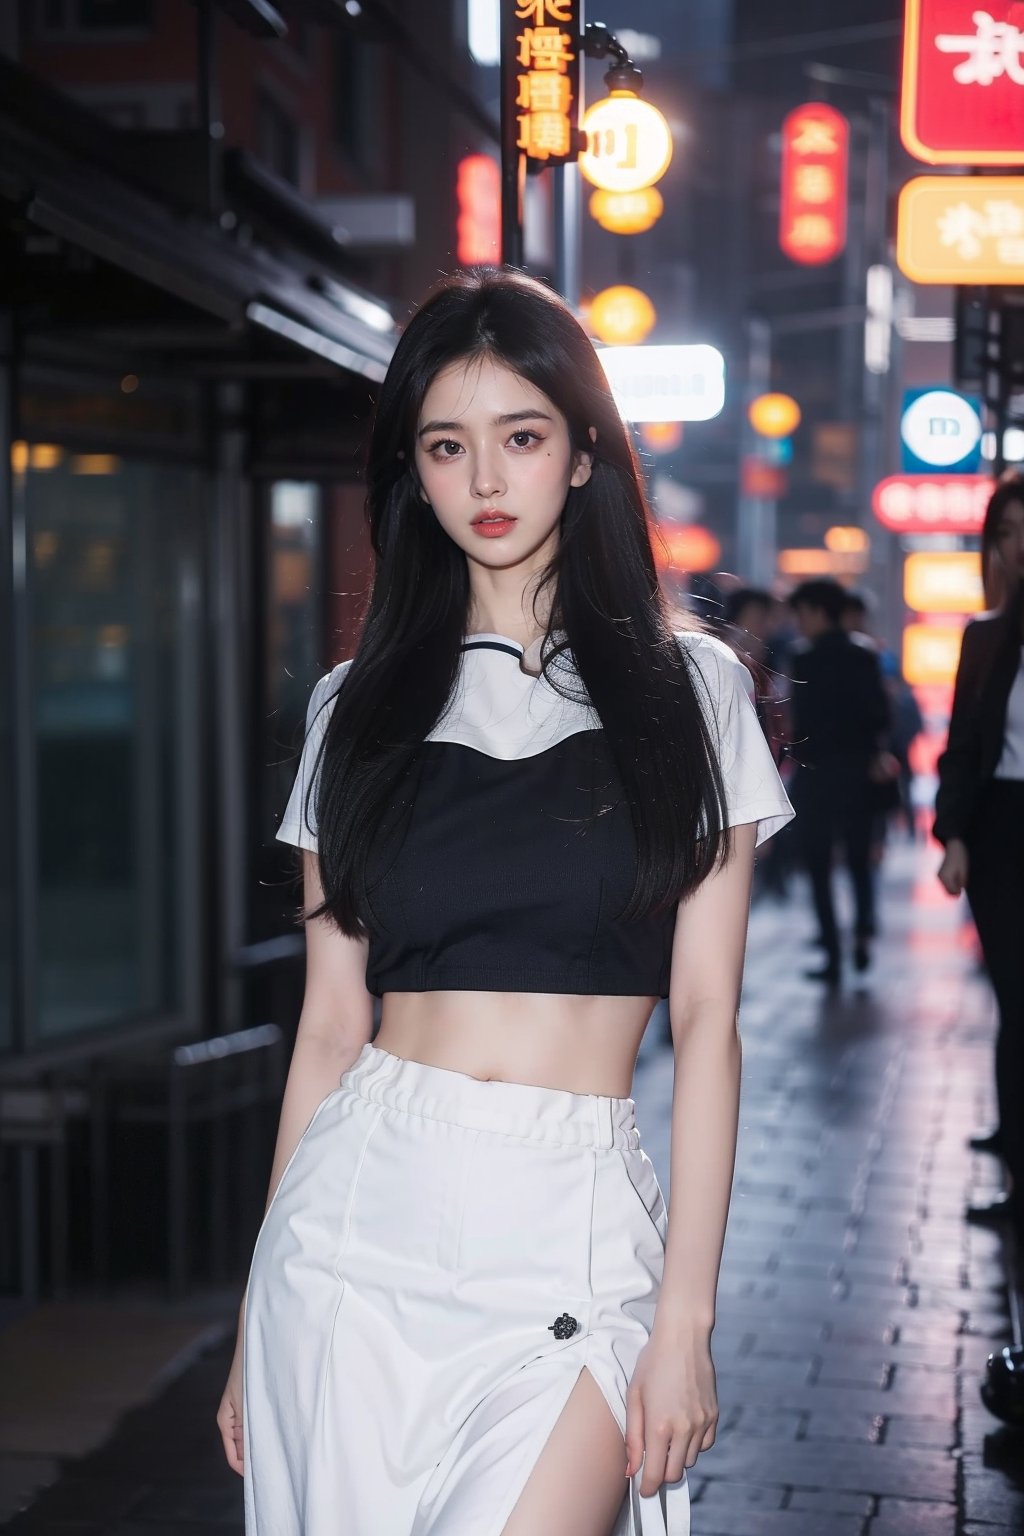 (intimate photo), 1girl,  busty slender Korean girl K-pop idol, long hair,  instagram model,  50mm, flash photography,  real life, cute face, tight thin form fitting crop top emphasizing her large bust and skirt , in Seoul city, at night, tight waist ,1girl,eungirl,chinatsumura,4ngel,twic_e0523,jiae,yoona,girly_clothing